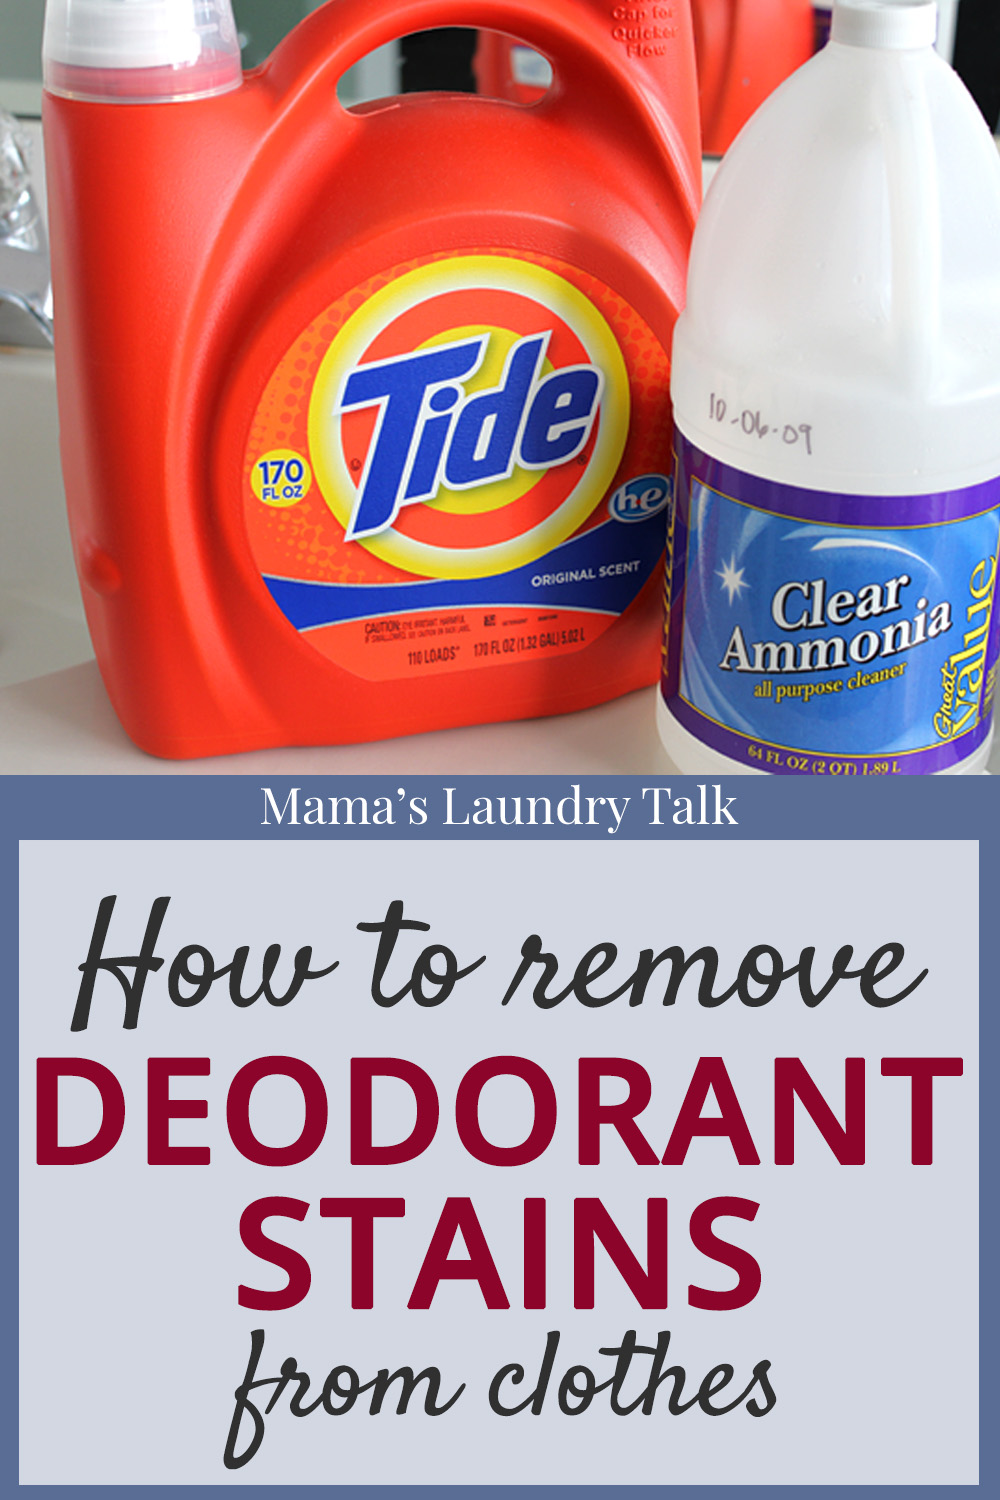 How to Remove Deodorant Stains from Clothes - Mama's ...